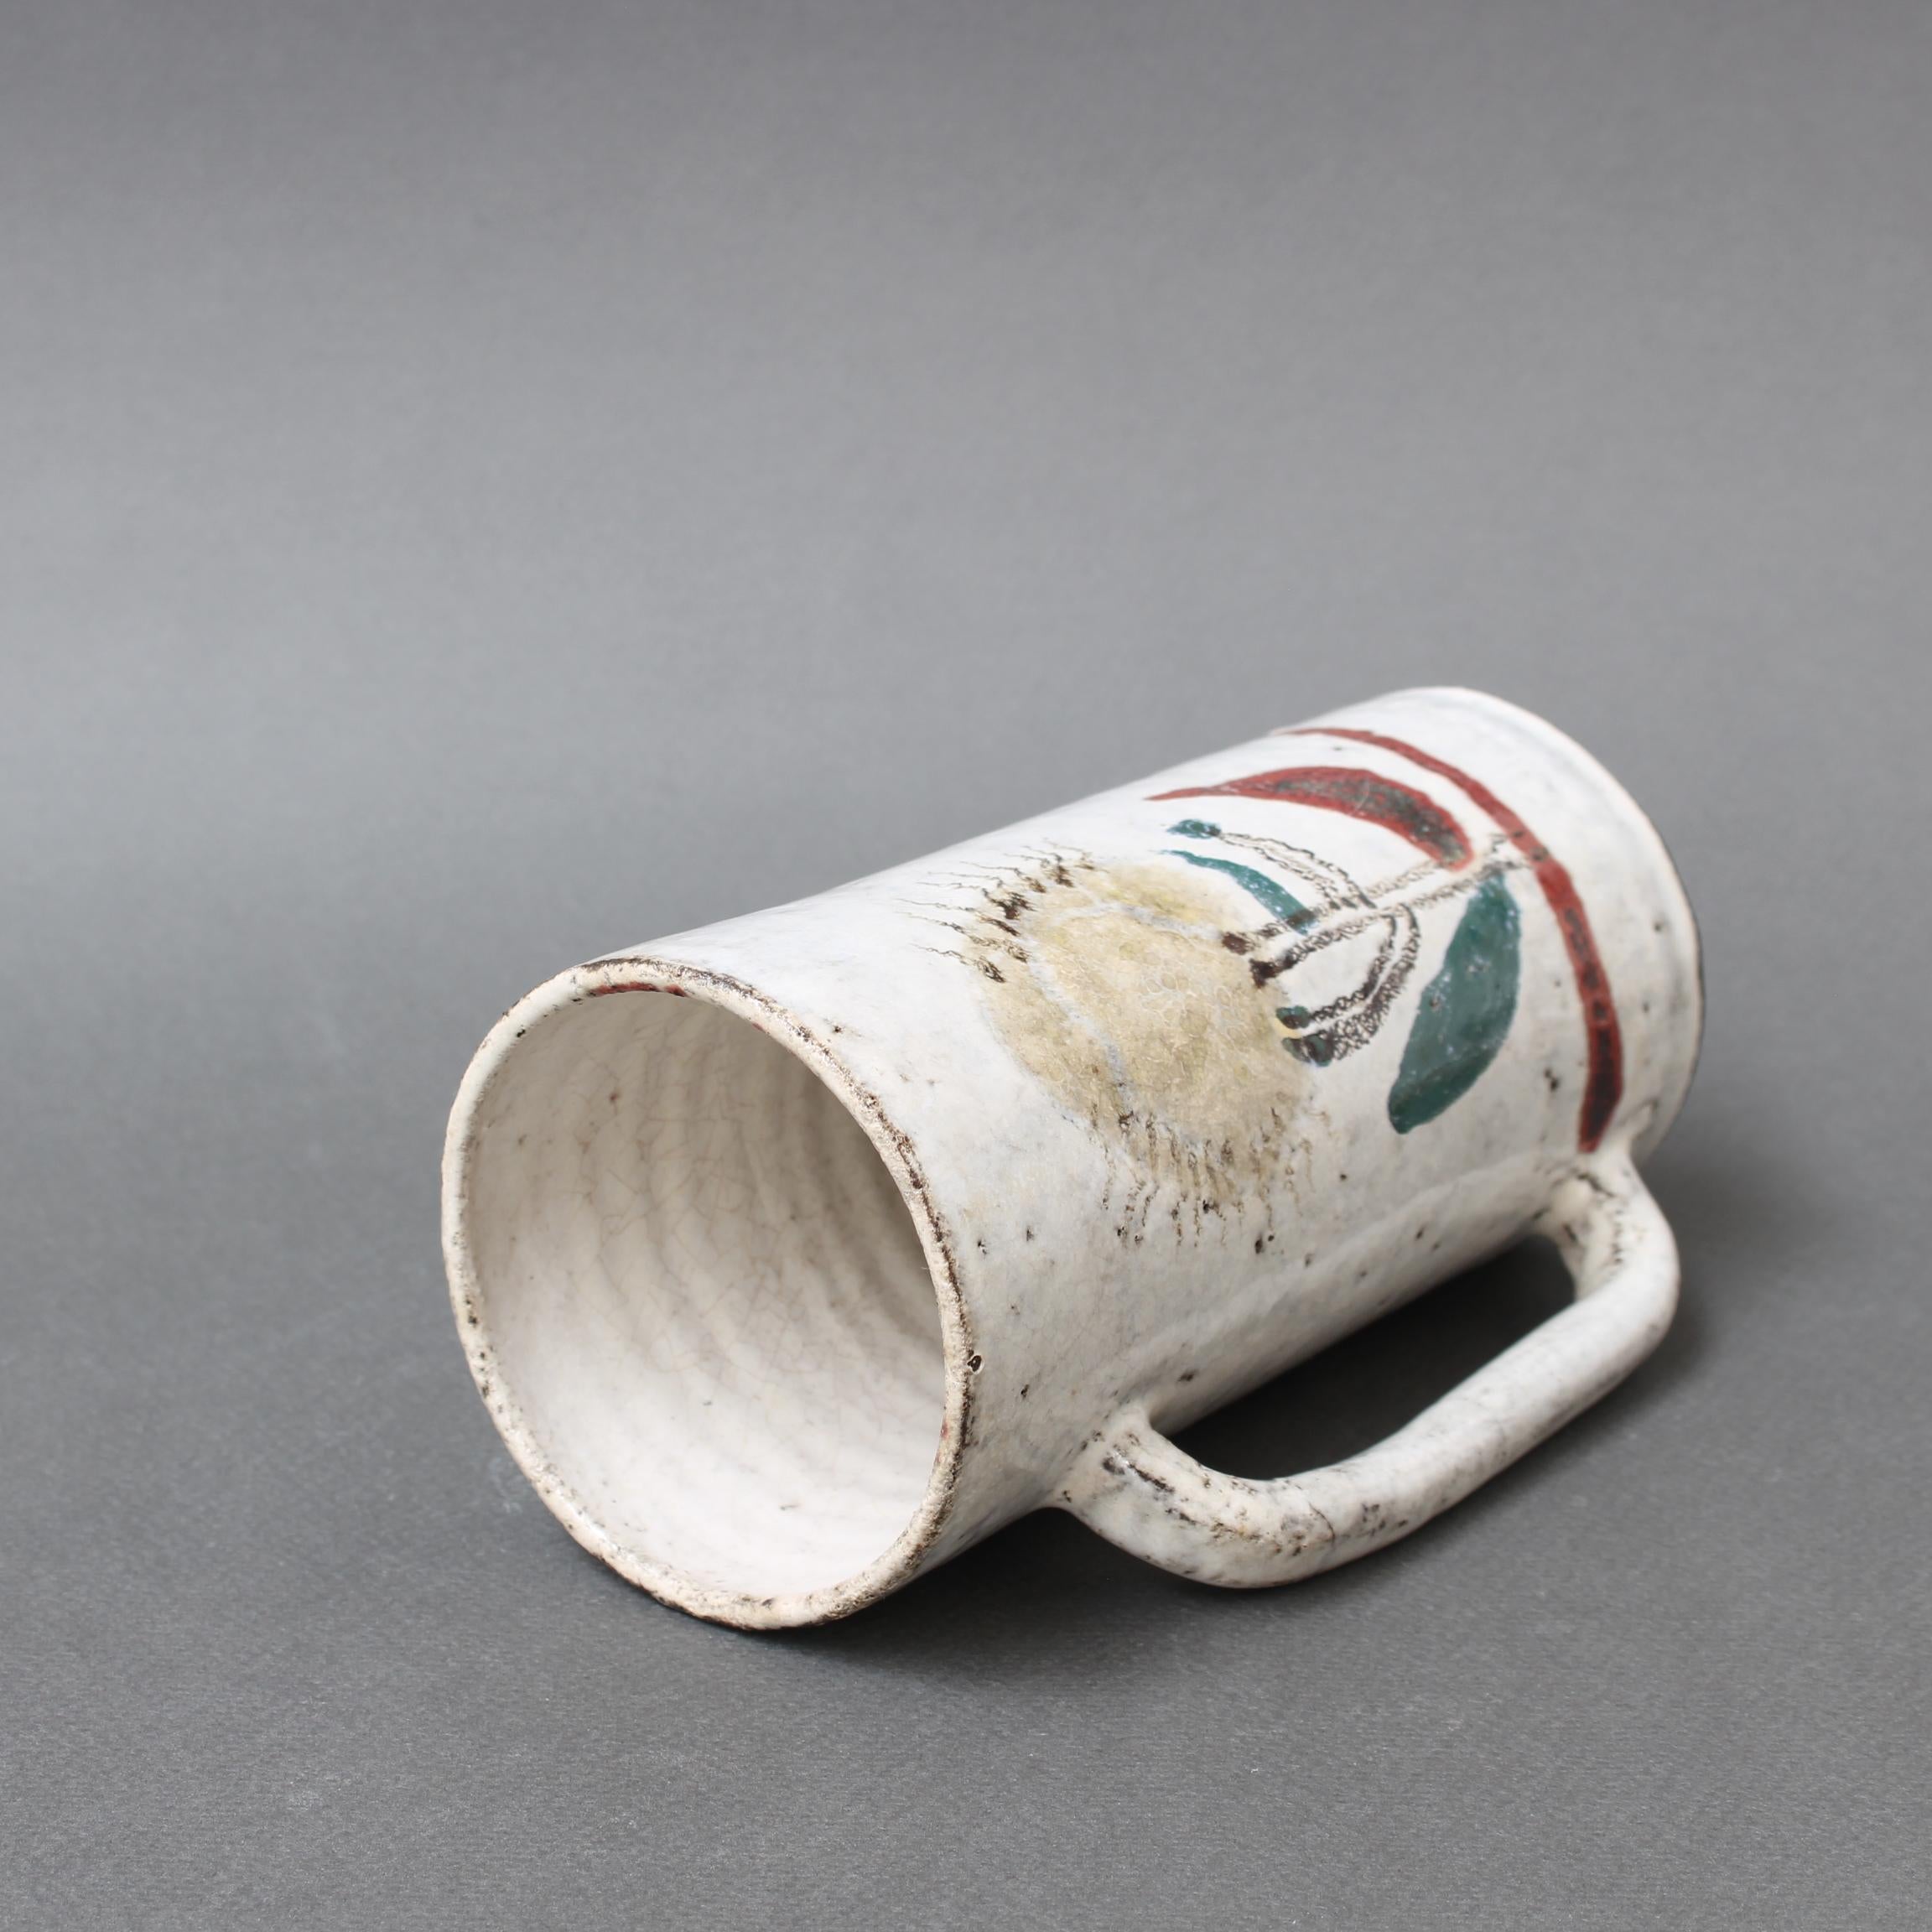 Mid-20th Century Vintage French Ceramic Decorative Stein by Gustave Reynaud for Le Mûrier Studio  For Sale